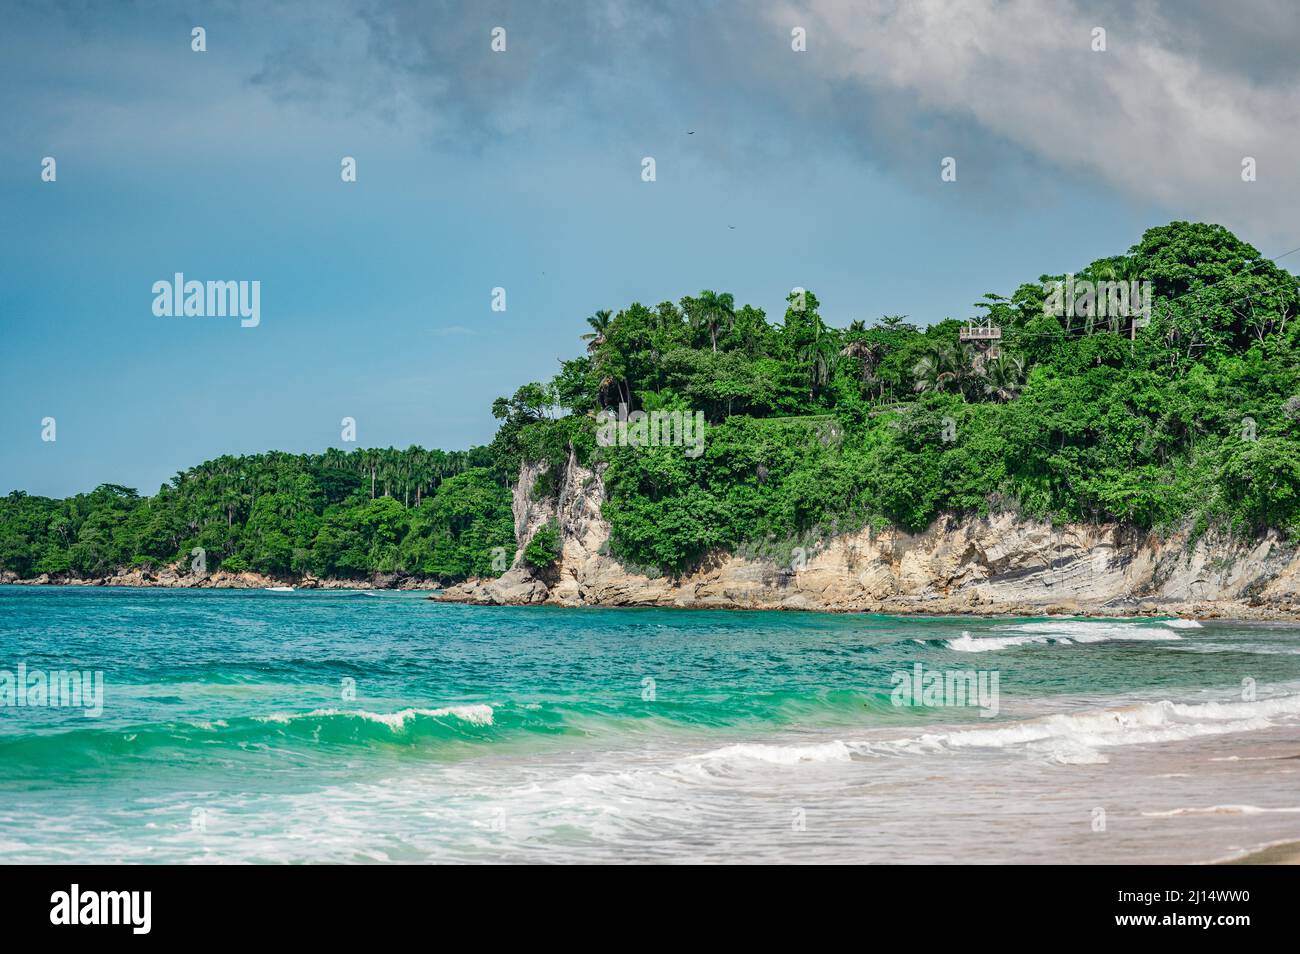 Photo of a sandy beach in the foreground from the Dominican Republic. The picture clearly shows the magnificent sand from the Atlantic Ocean and the b Stock Photo